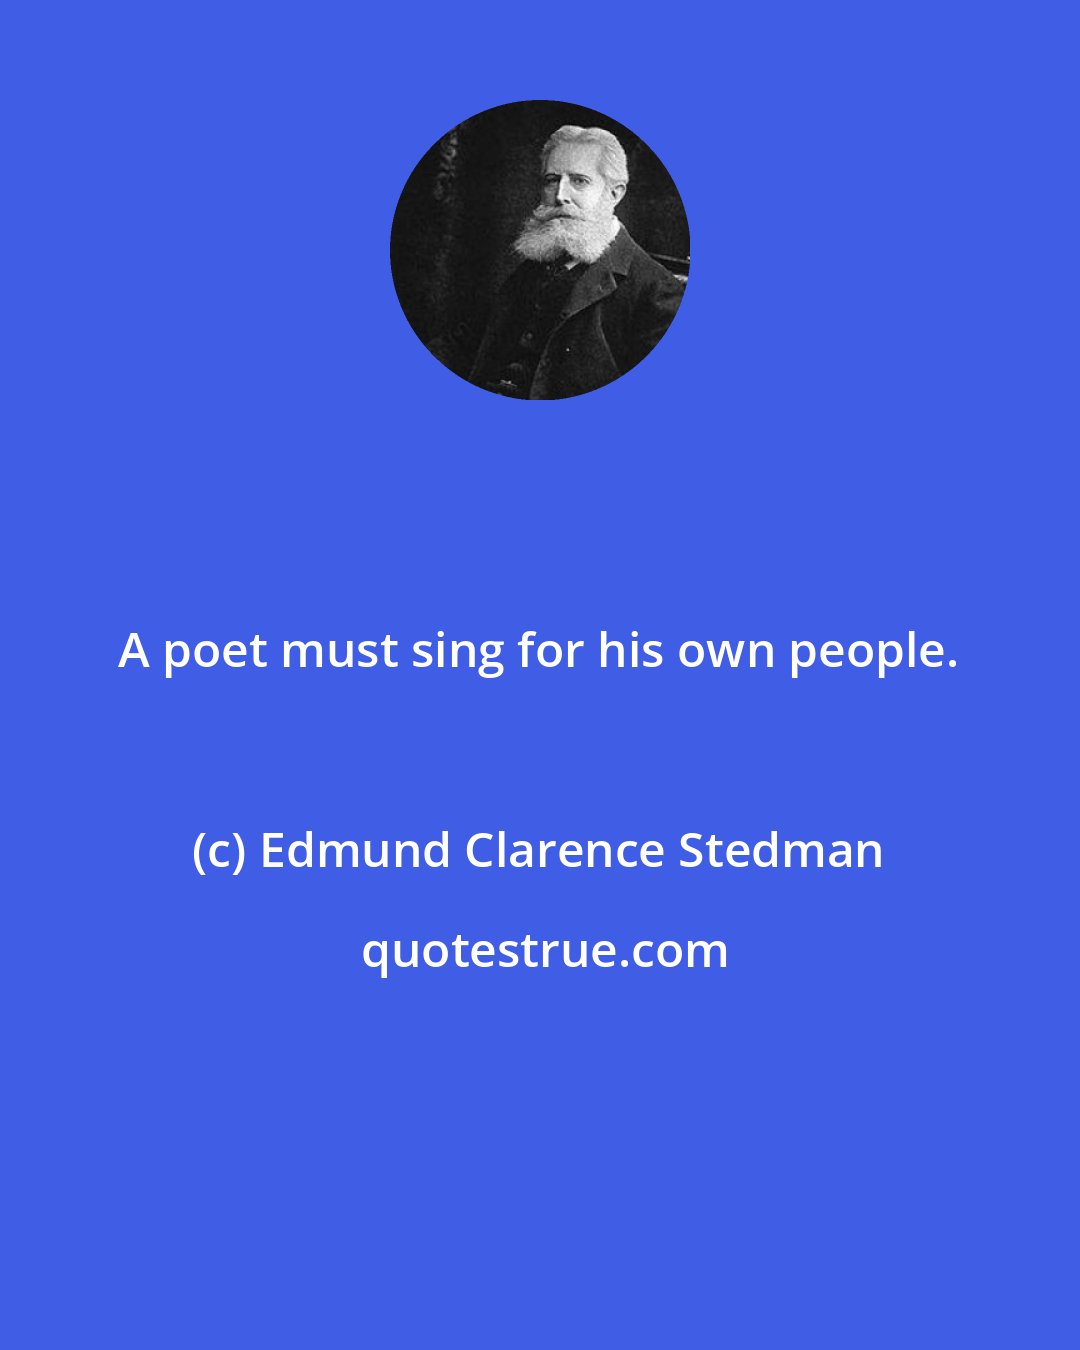 Edmund Clarence Stedman: A poet must sing for his own people.